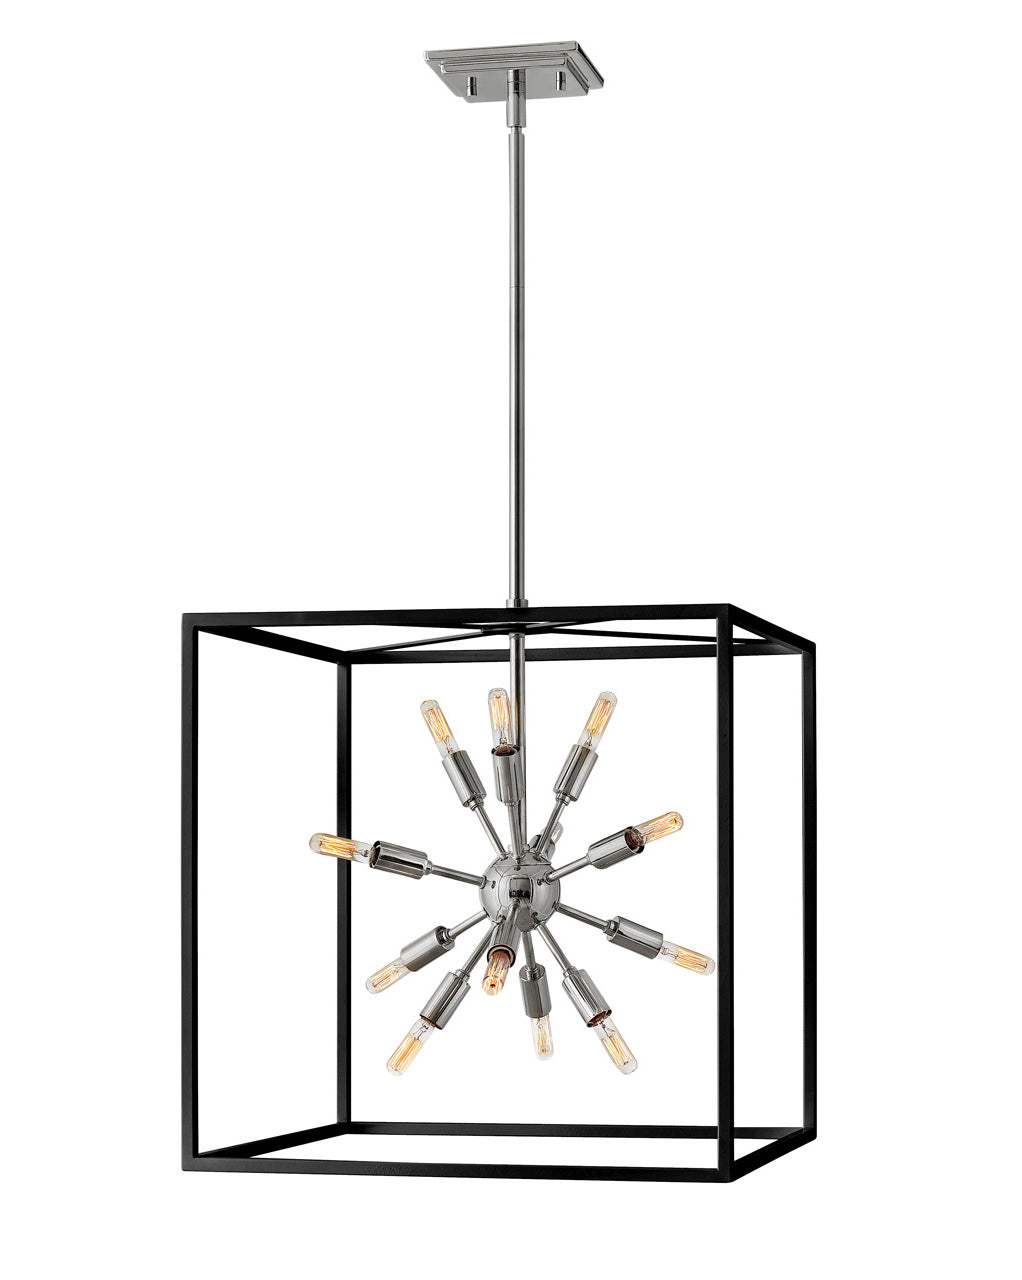 Hinkley Aros Chandelier Chandeliers Hinkley Black with Polished Nickel accents 20.0x20.0x21.0 